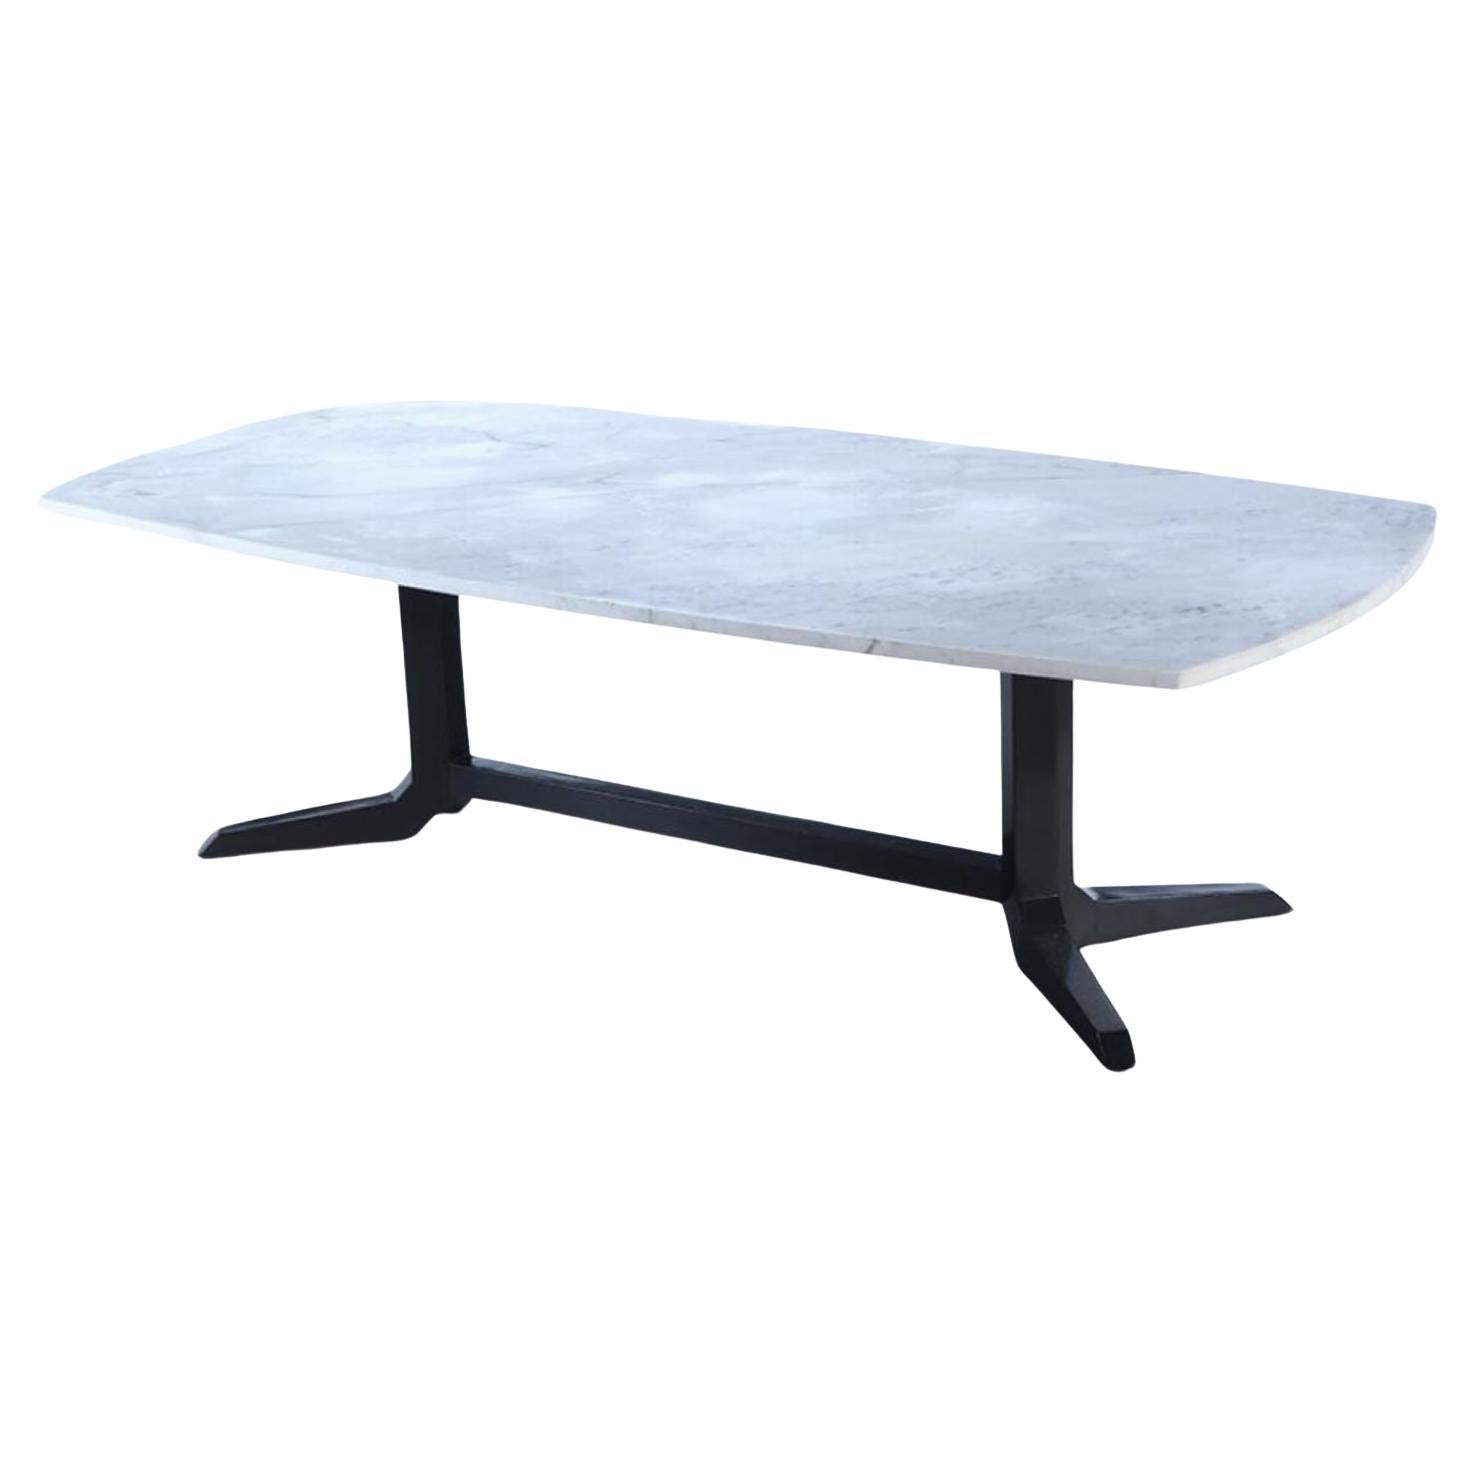 An ebonized marble top dining table circa 1960. For Sale